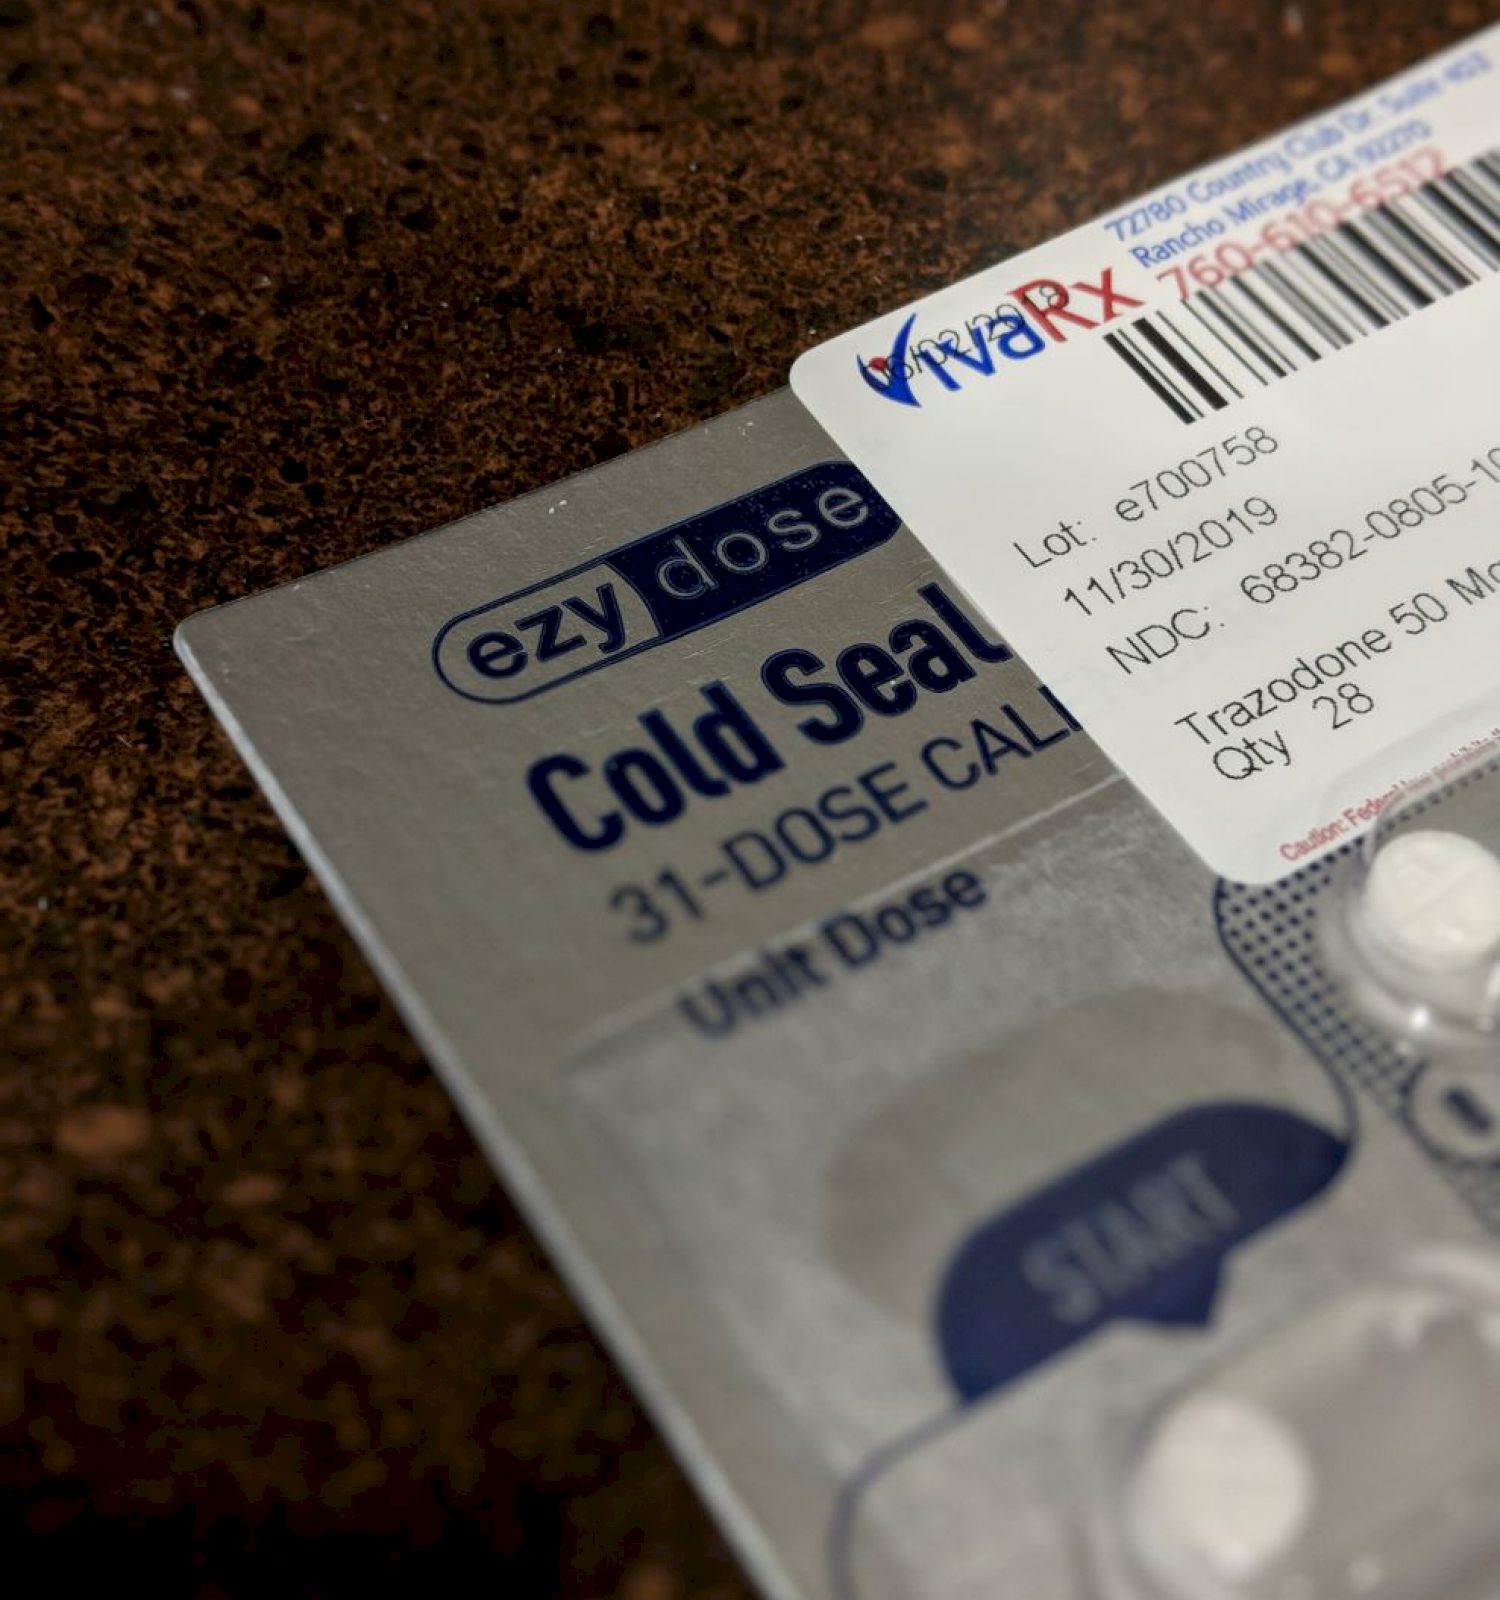 The image shows a pack of cold seal medication and a prescription label from Viva Rx pharmacy. The label includes patient and drug information.